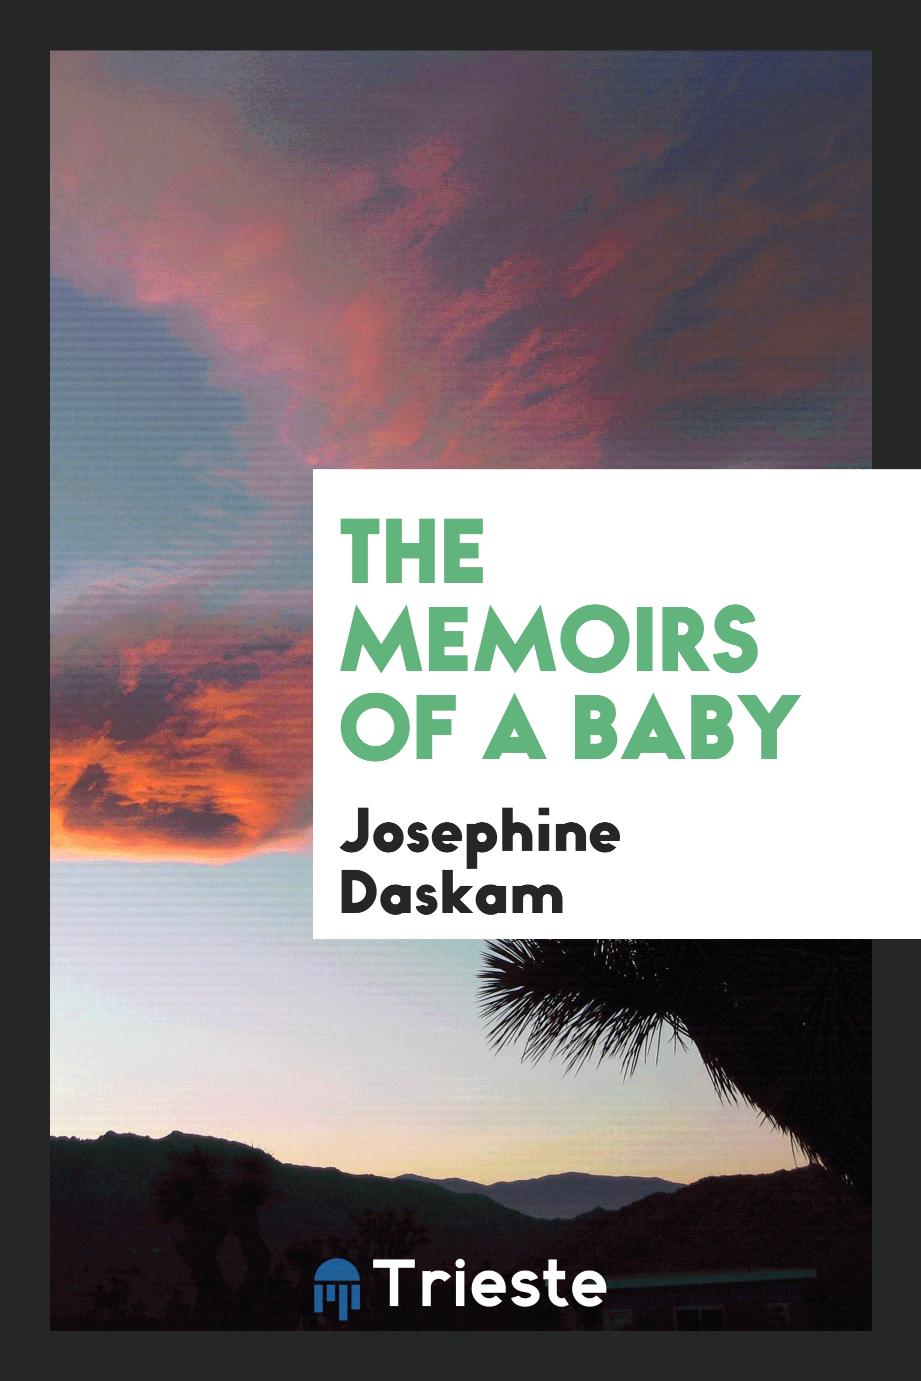 The memoirs of a baby